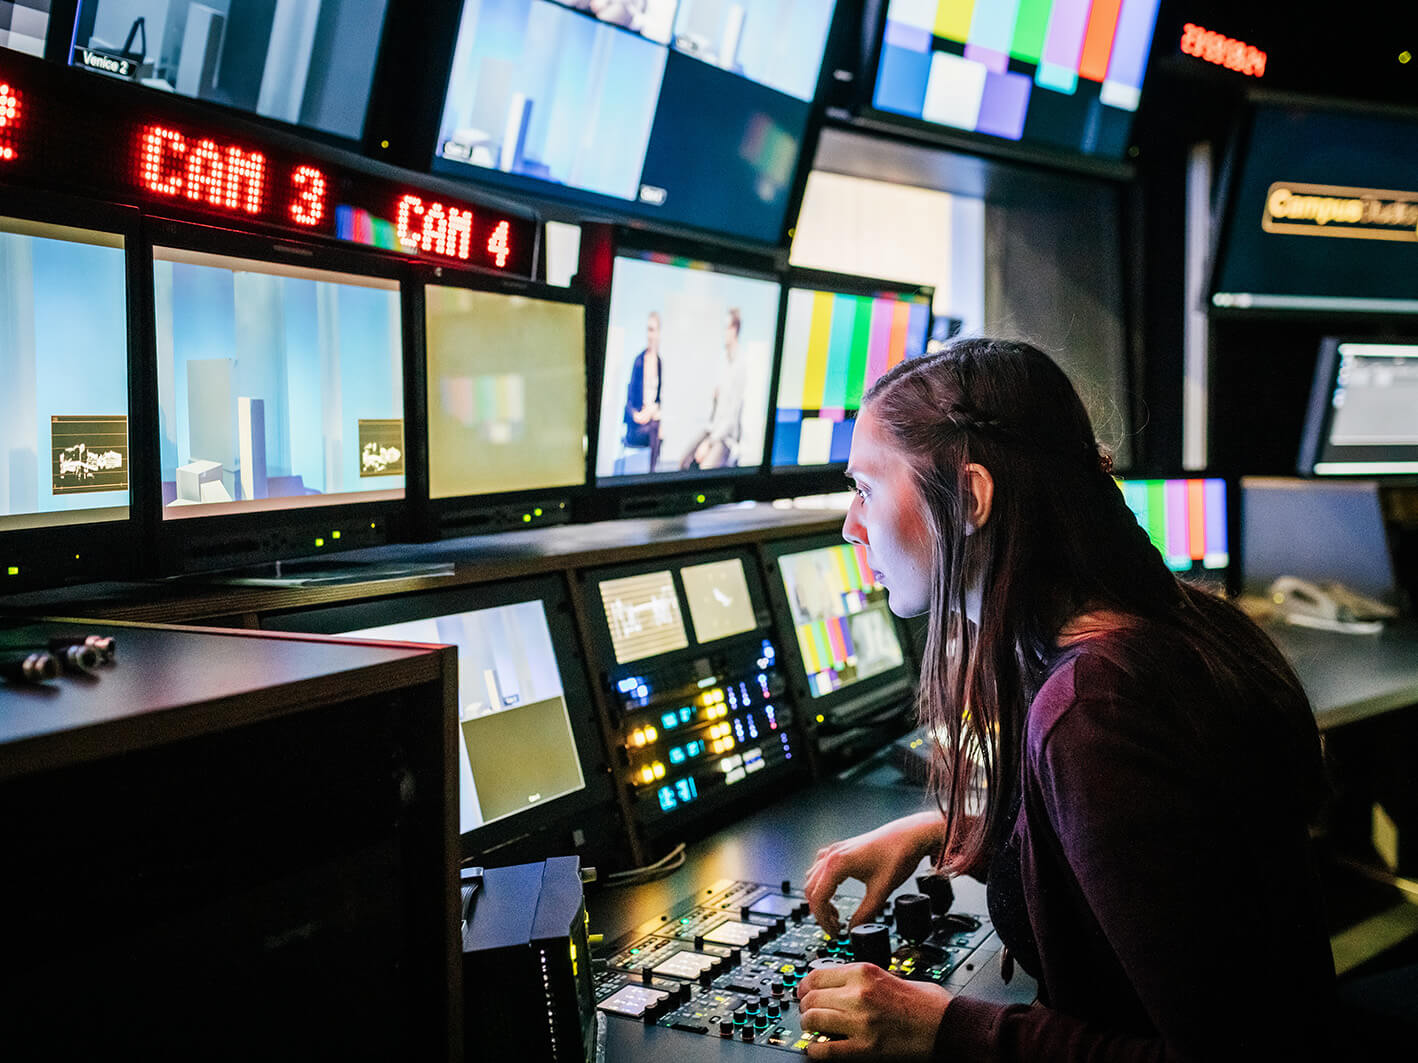 Woman in video control room monitoring screens